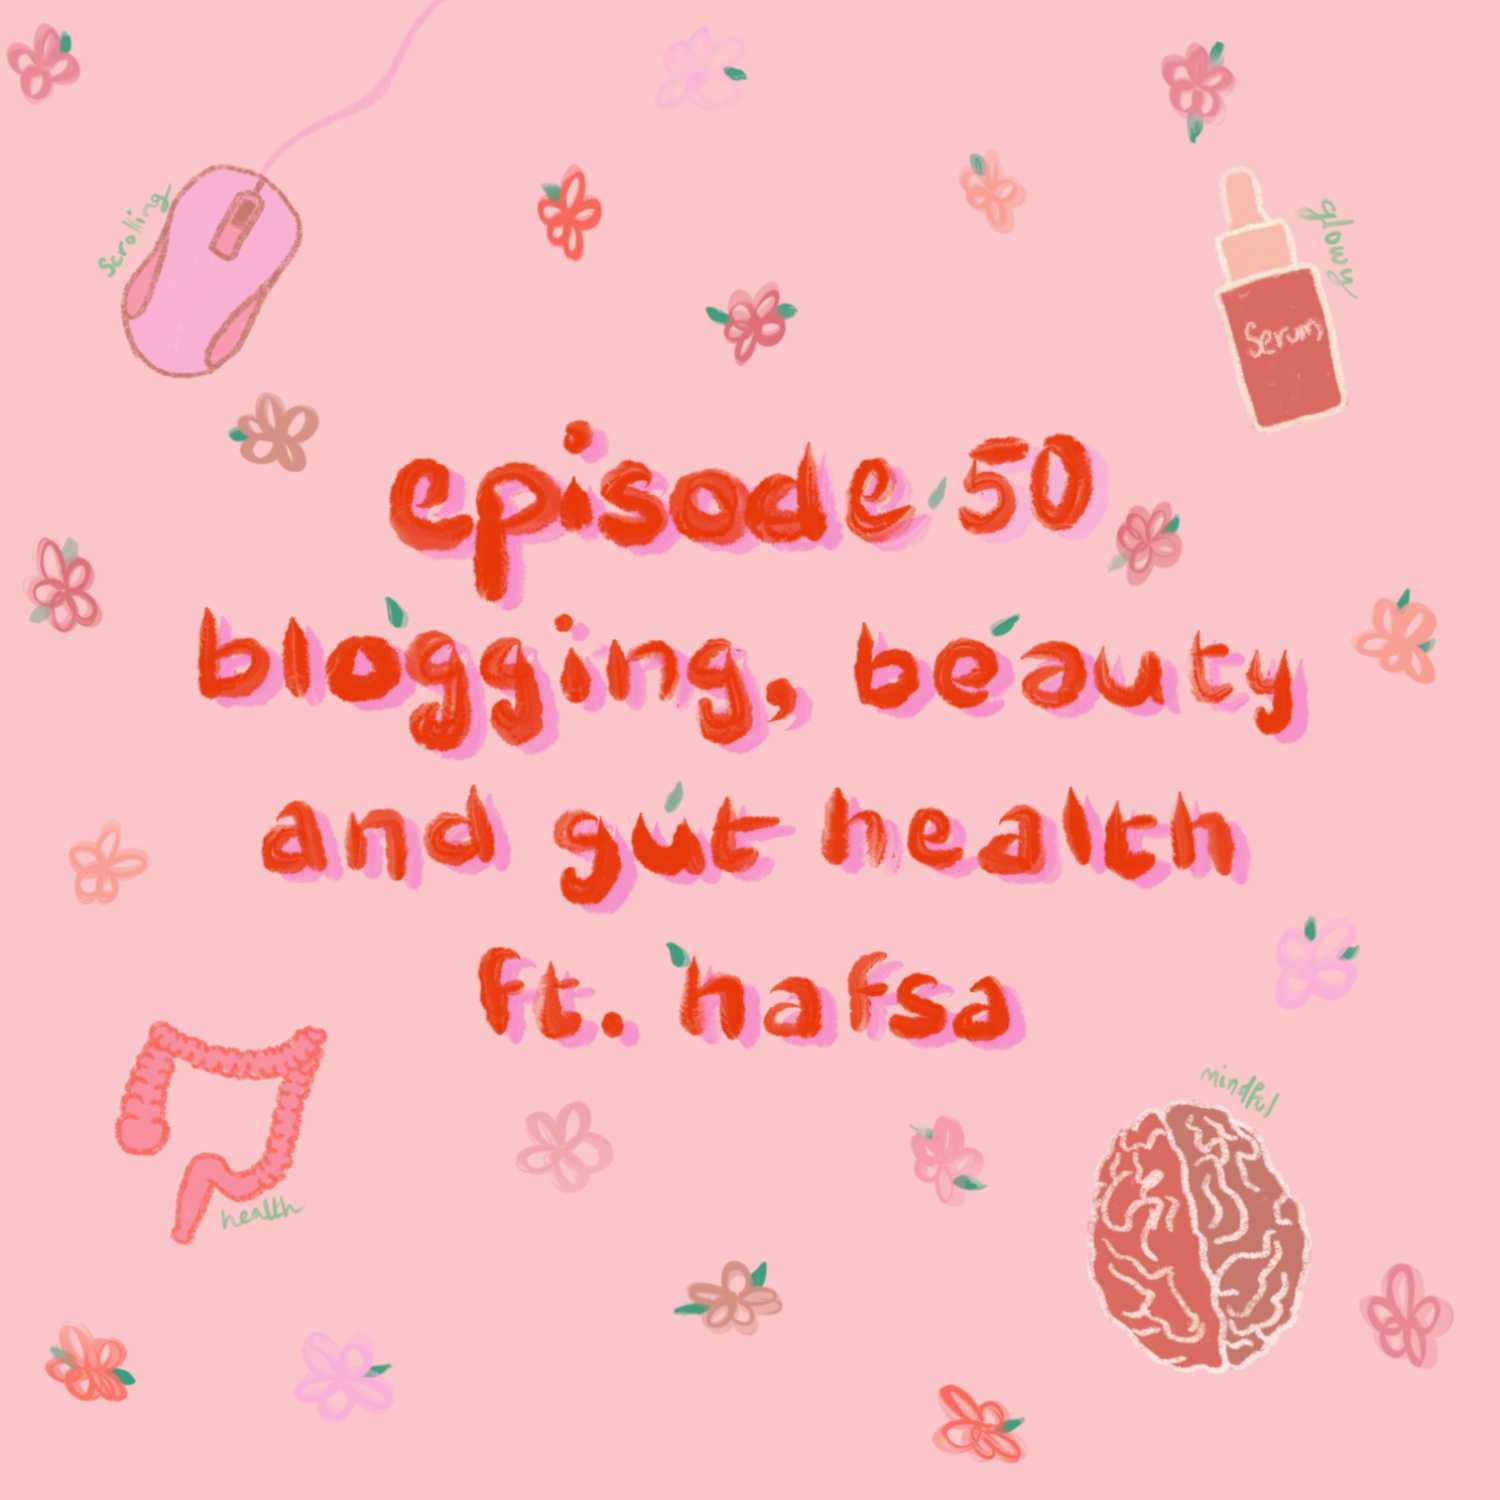 Beauty In One: Blogging, Beauty and Gut Health with Hafsa from Mind Pretty Soul